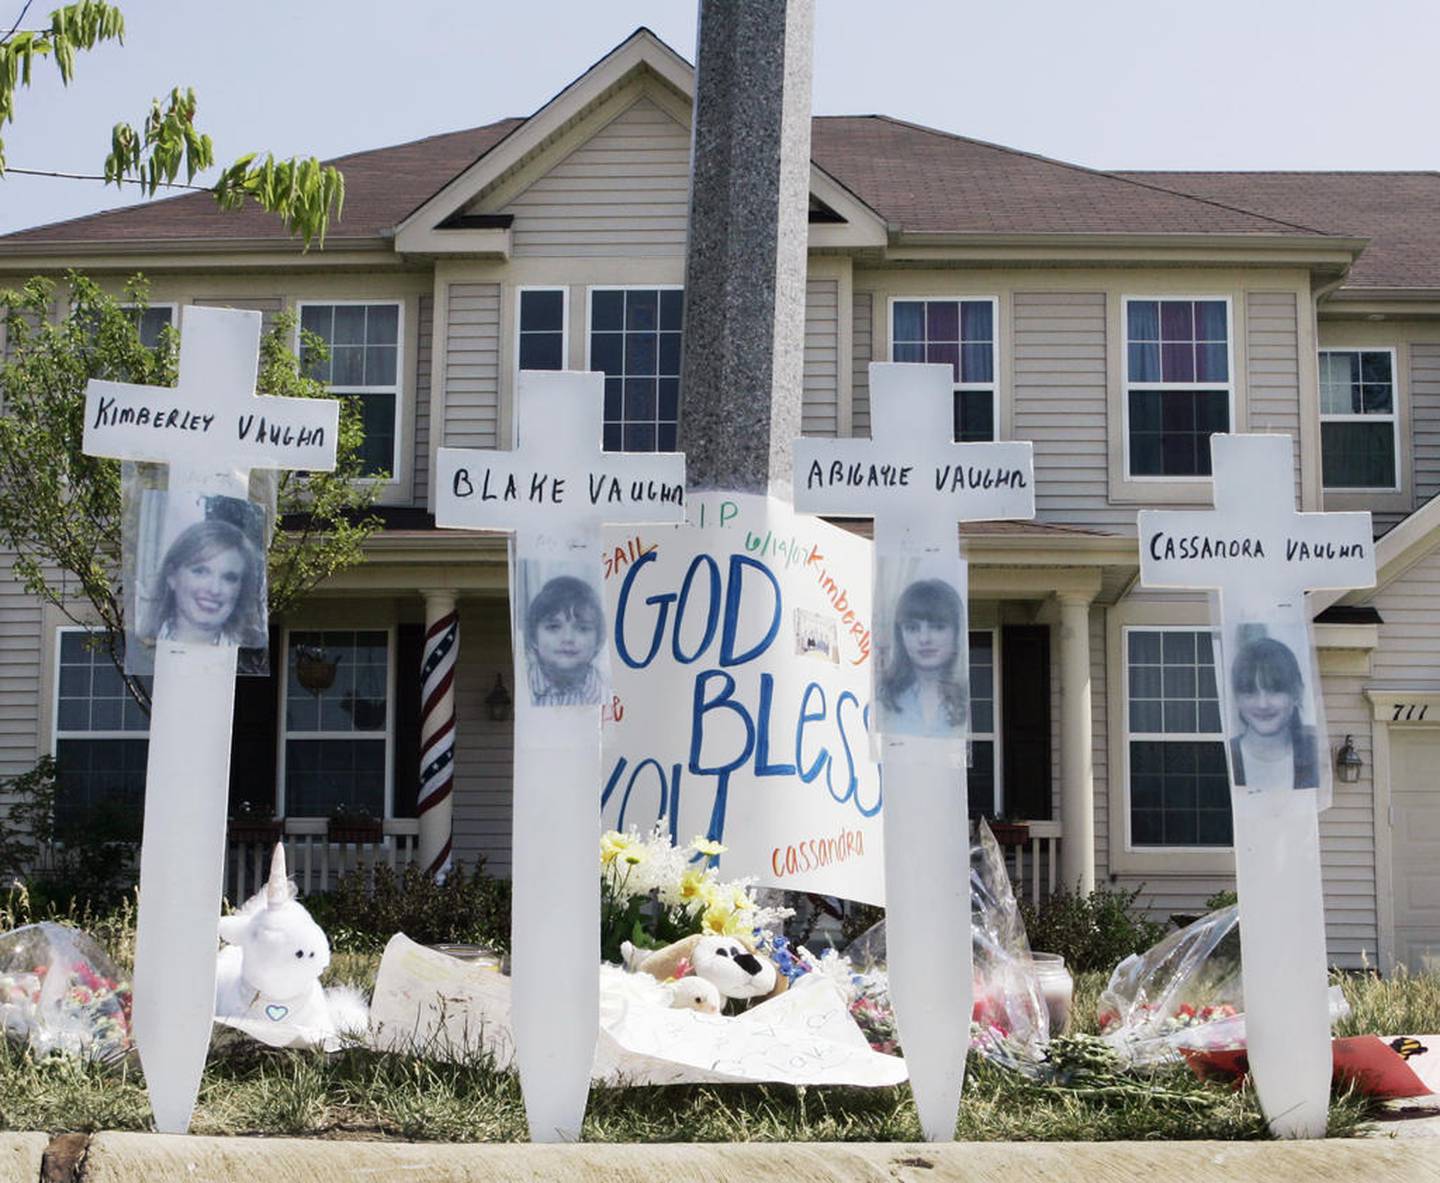 A makeshift memorial to Kimberly Vaughn and her children Abigayle, 12, Cassandra, 11, and Blake, 8, is seen in June 2007 outside their home in Oswego. Christopher Vaughn was found guilty Thursday of murdering his wife and three children.